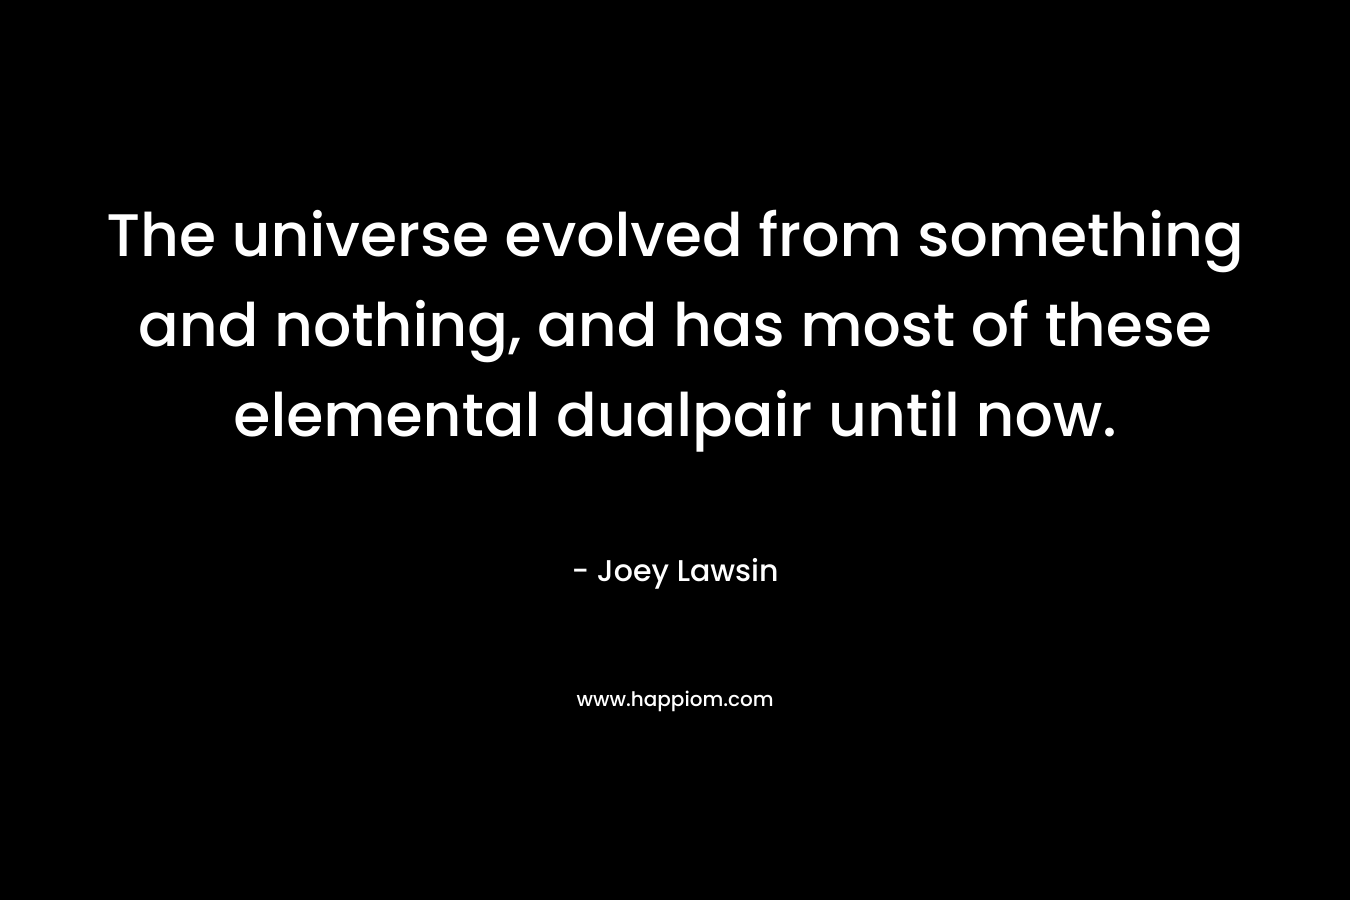 The universe evolved from something and nothing, and has most of these elemental dualpair until now.